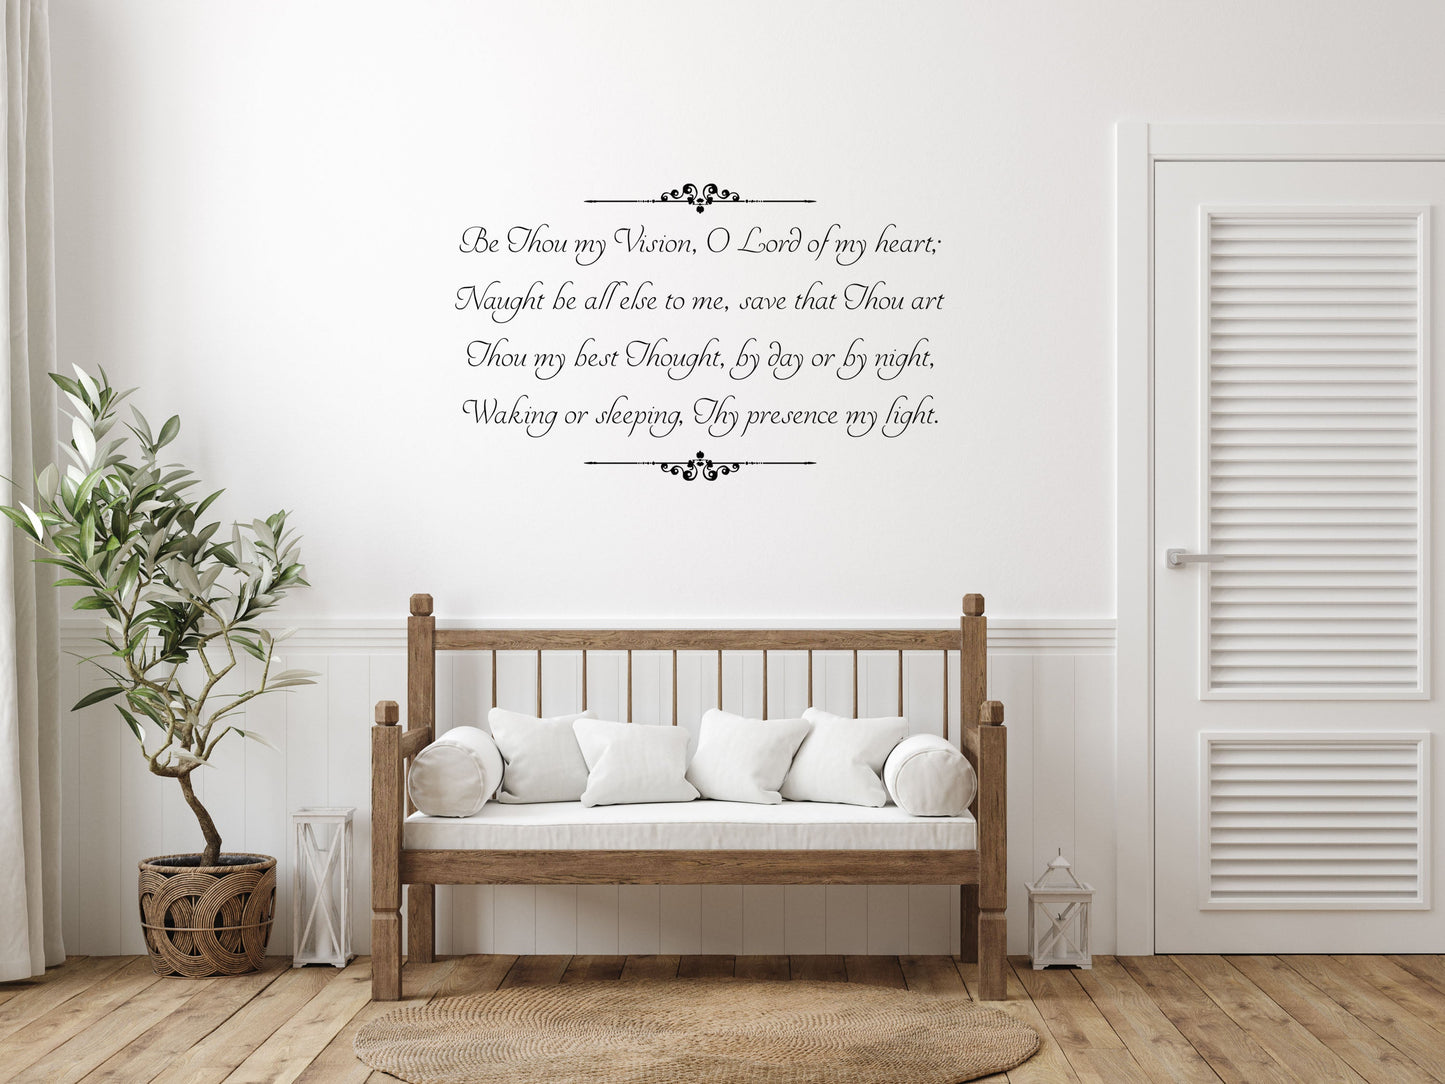 Be Thou My Vision Church Hymn Decal Sticker Vinyl Wall Decal Done 